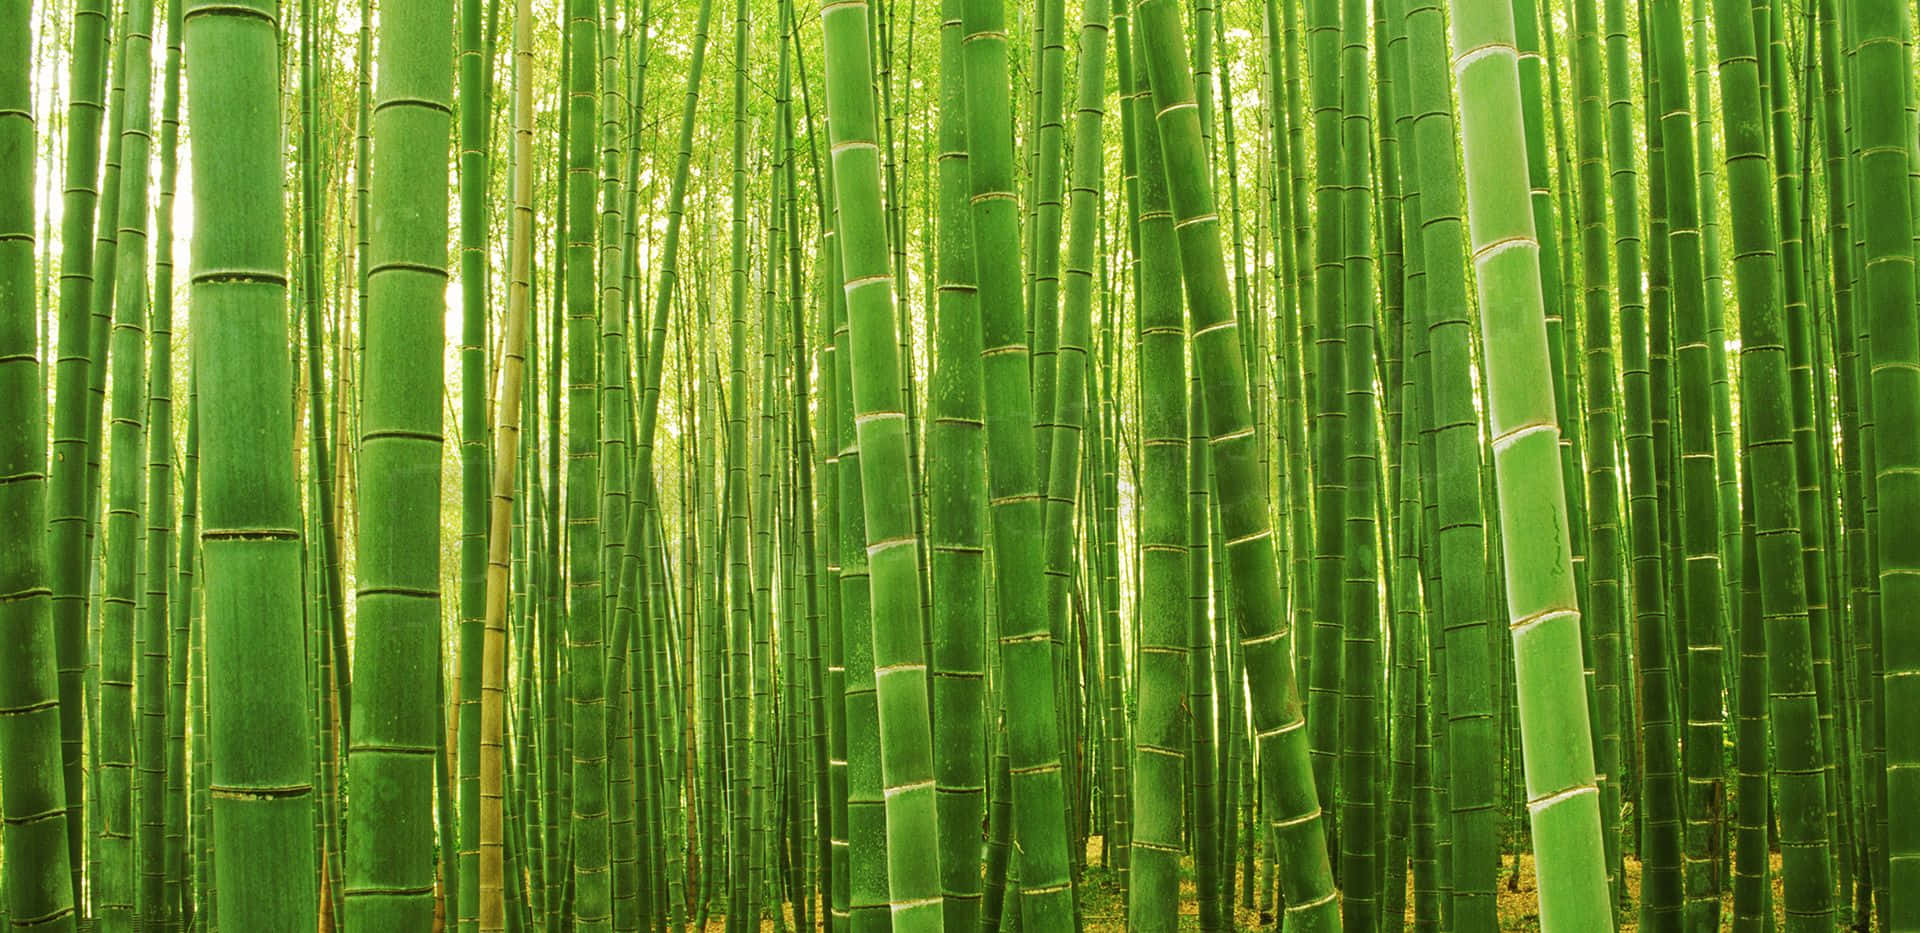 Bamboo Forests in Natural Habitat